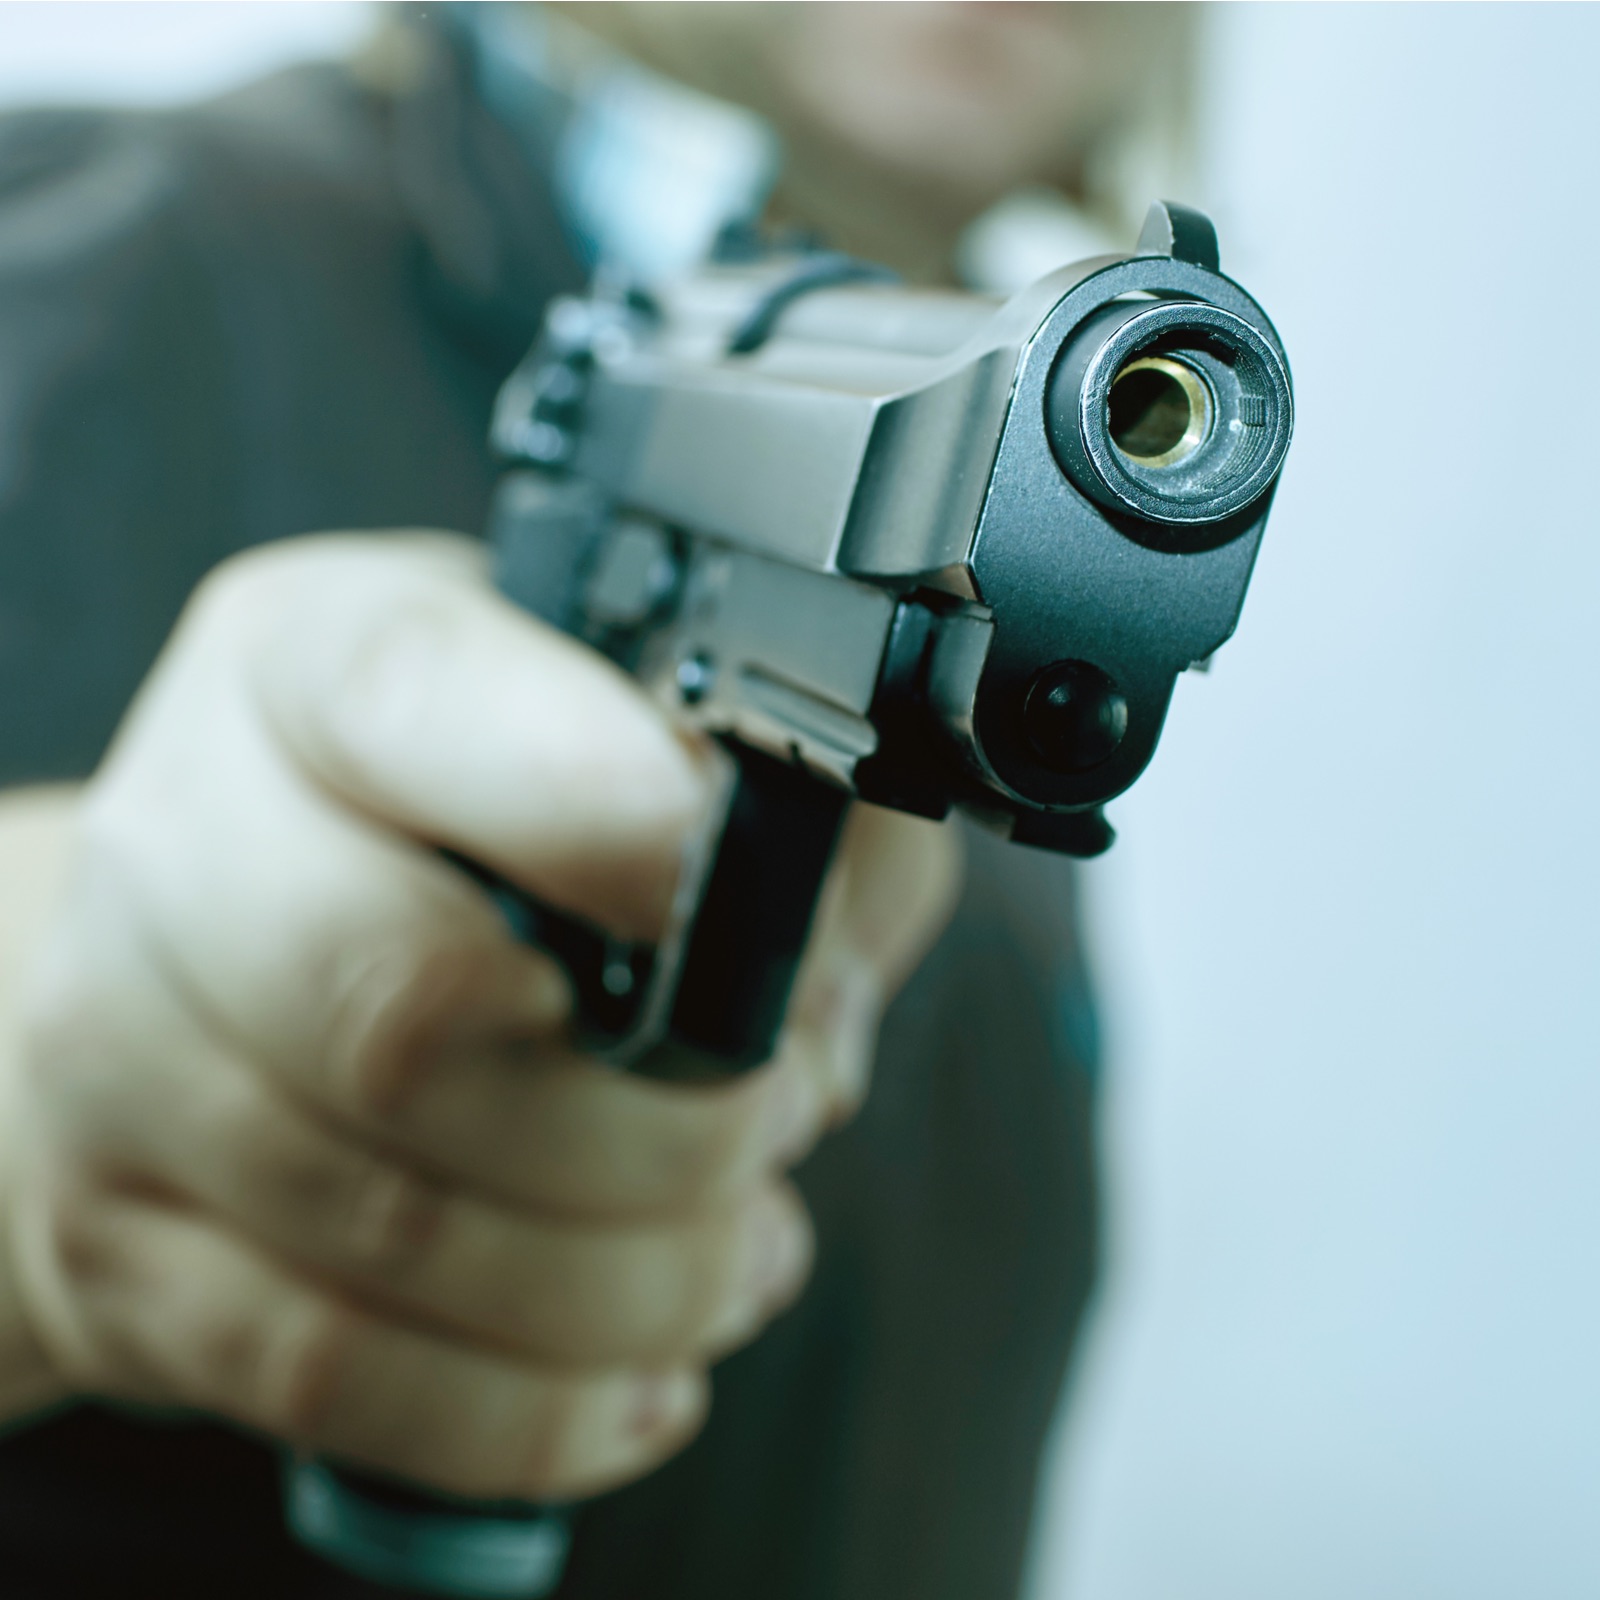 Man Allegedly Kidnaps Friend at Gunpoint and Steals $1.8m of Cryptocurrency